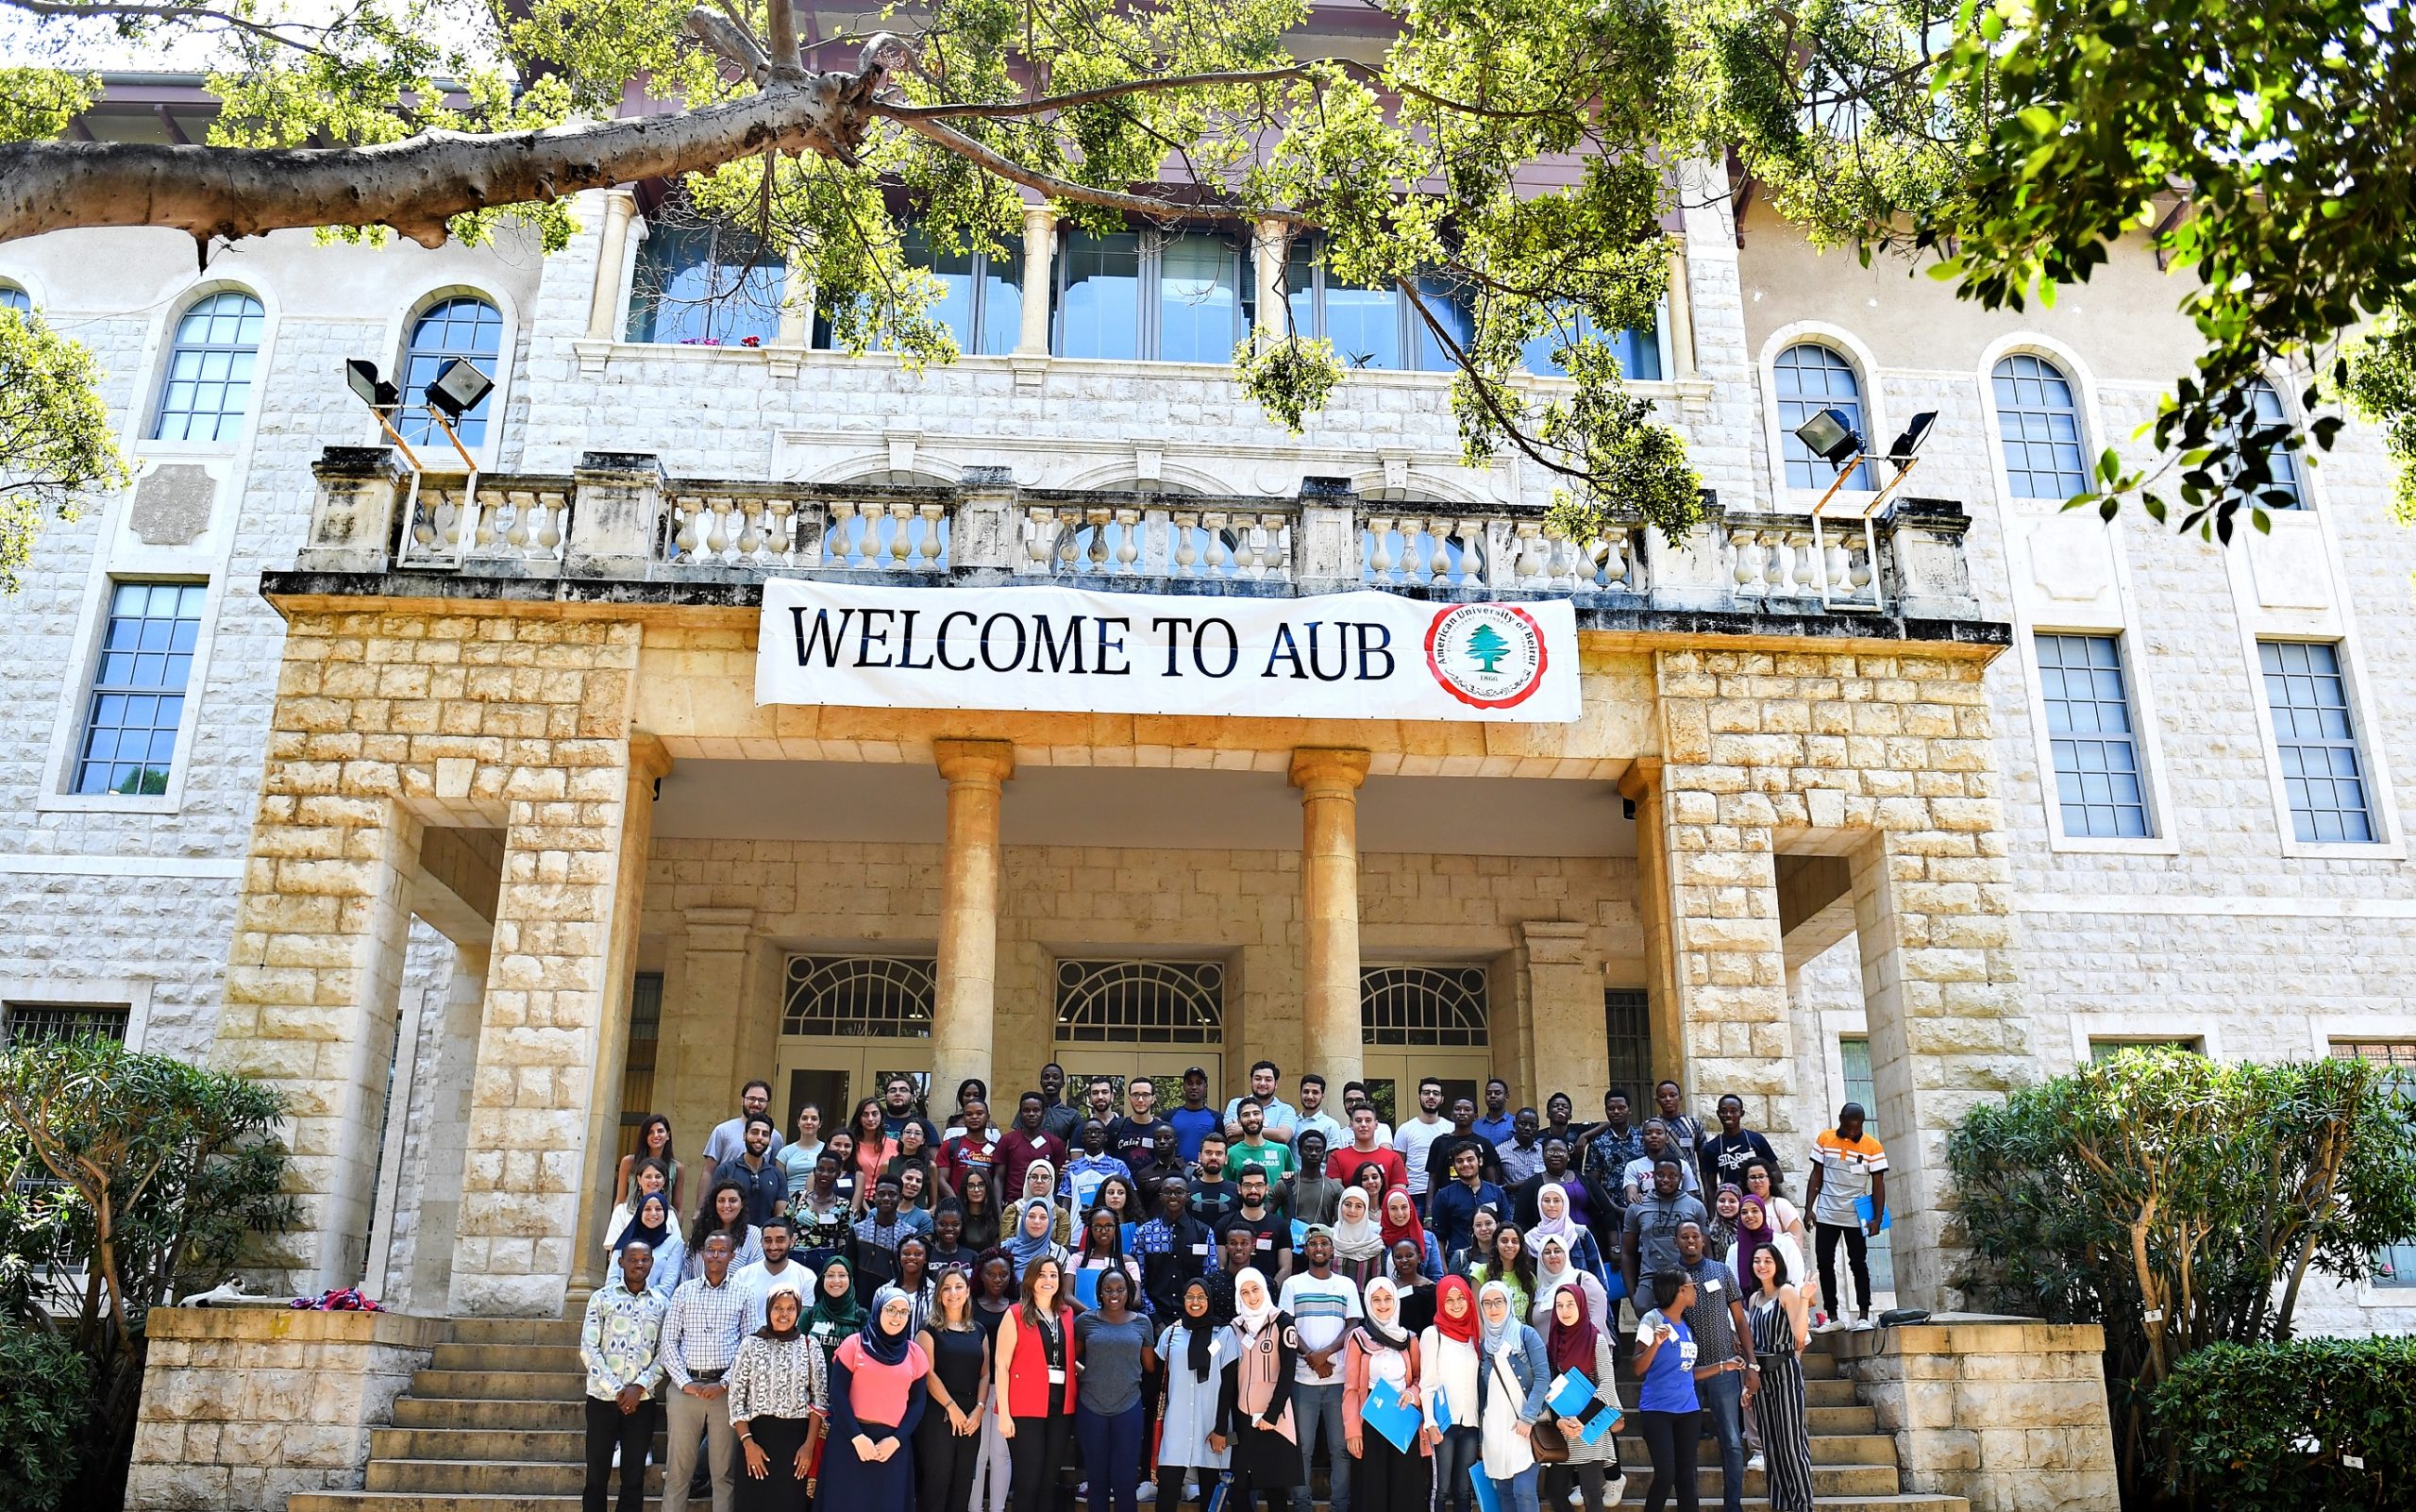 MASTERCARD FOUNDATION SCHOLARS PROGRAM 2020/2021 AT THE AMERICAN UNIVERSITY OF BEIRUT (FULLY FUNDED)